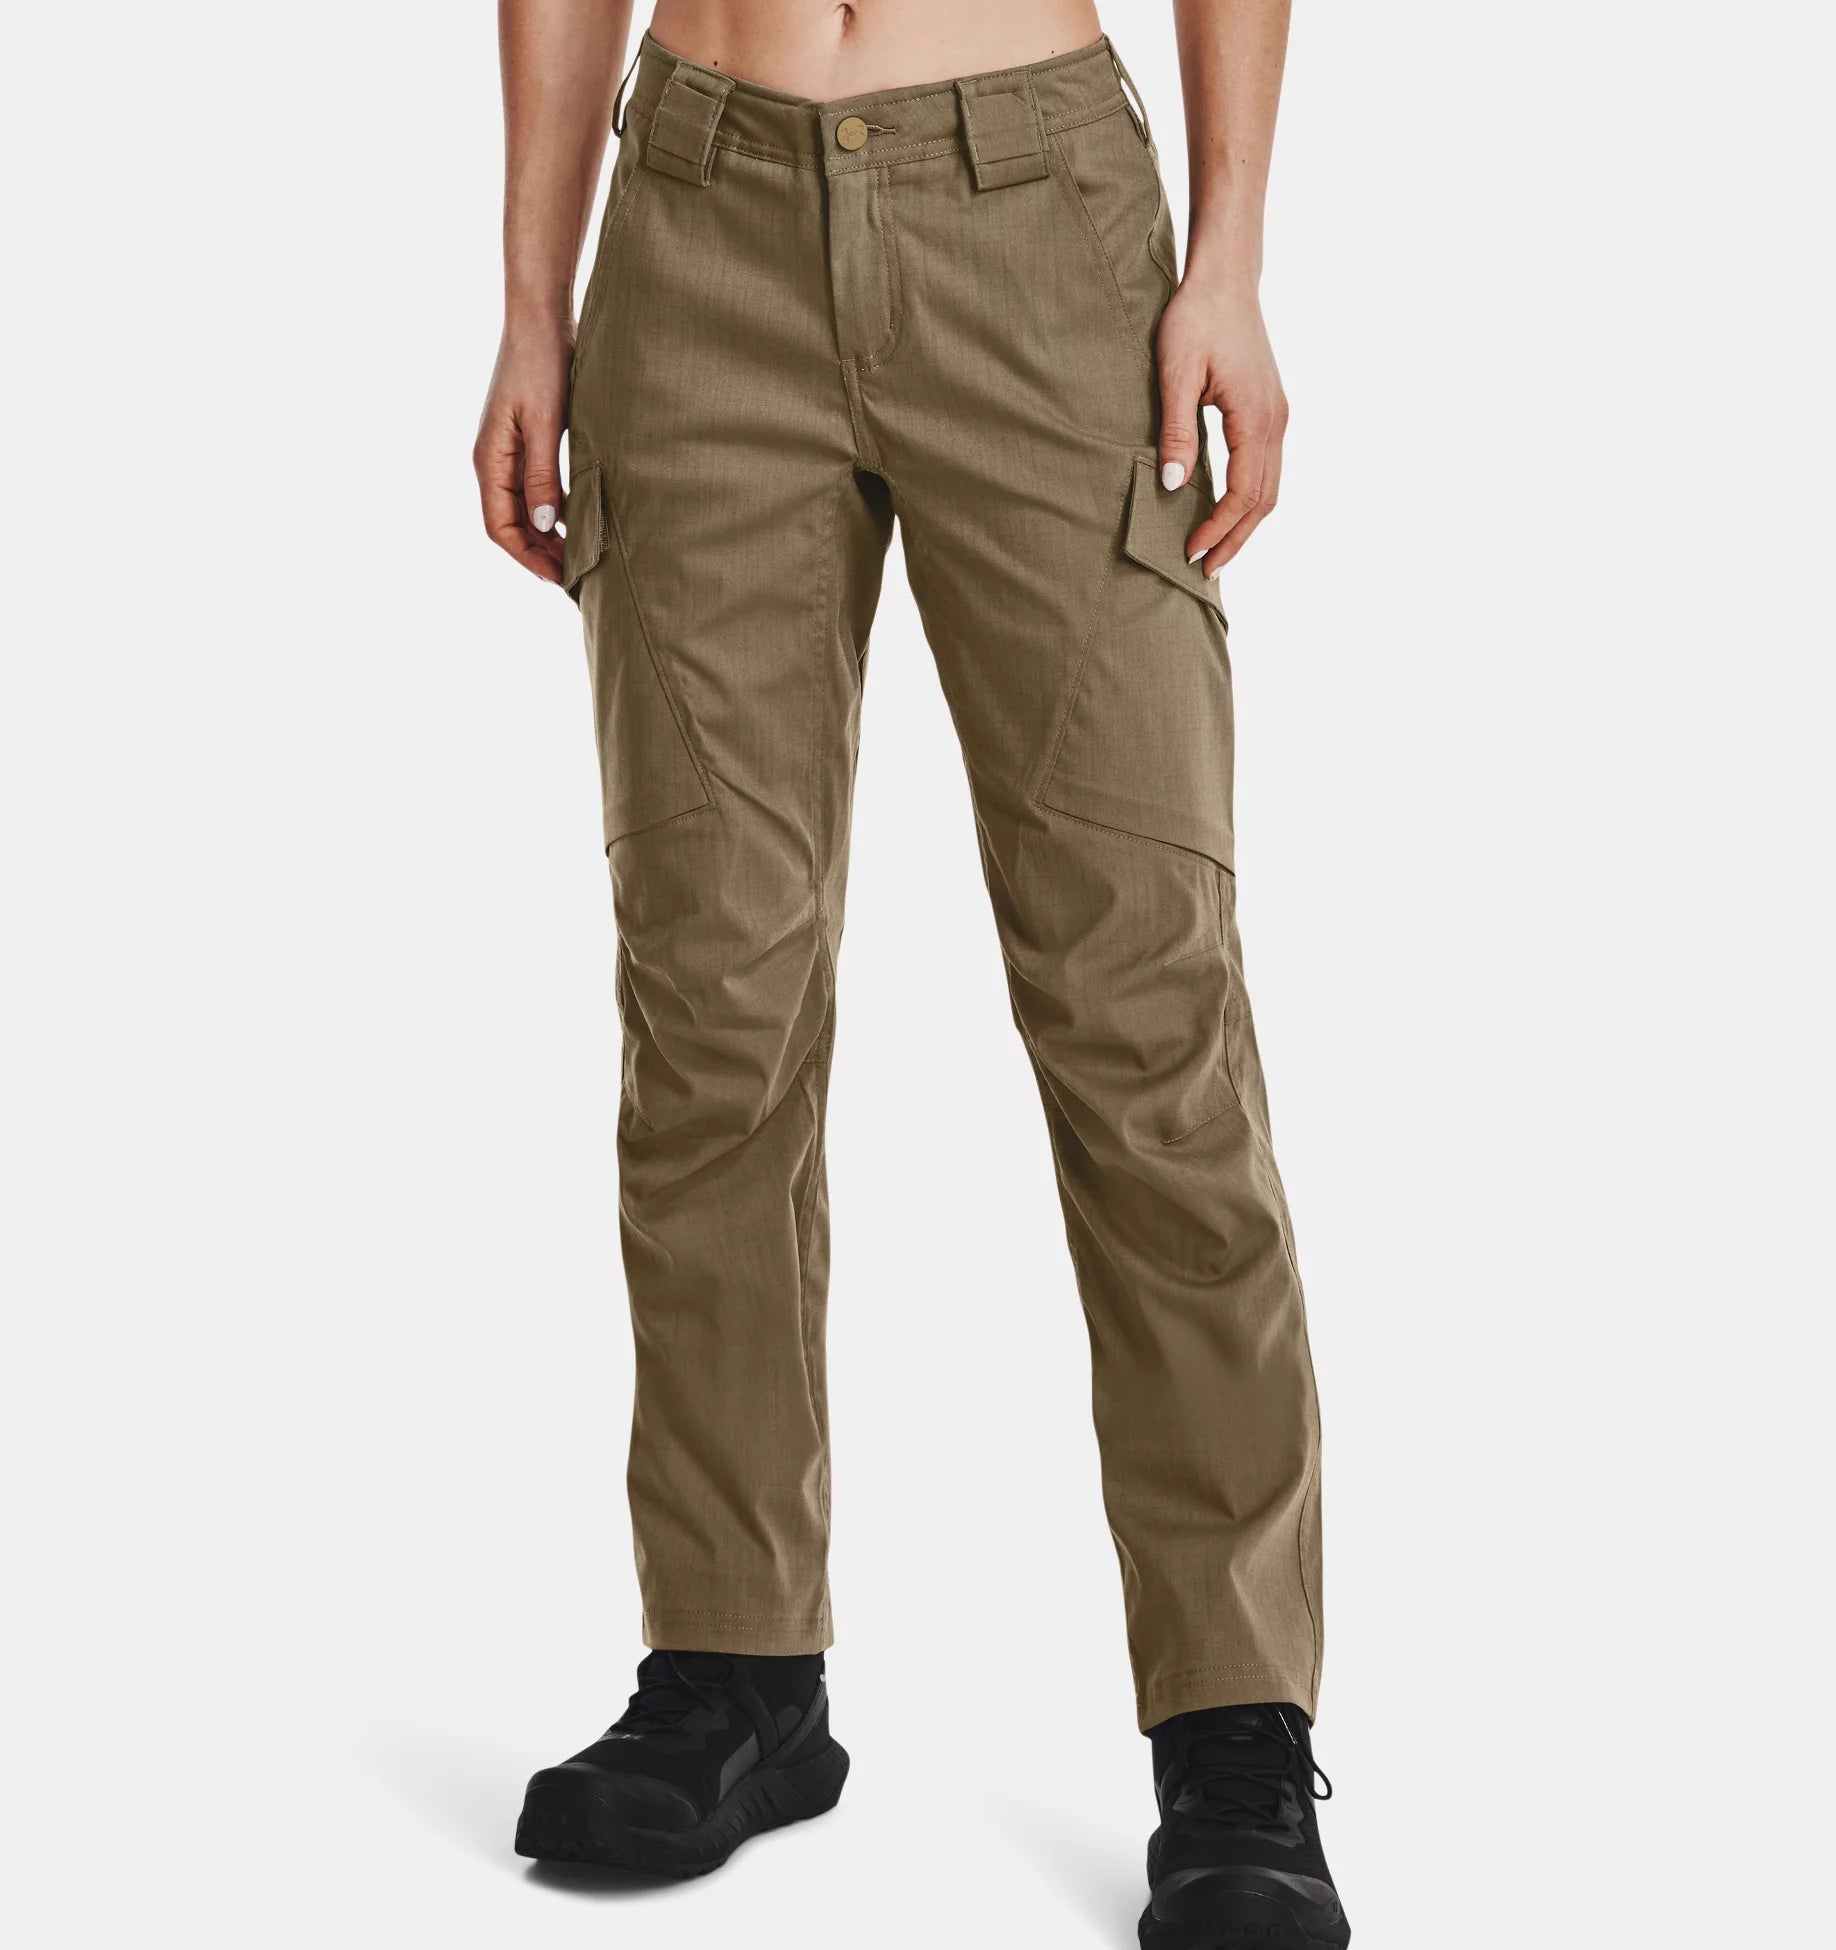 Under Armour Tactical Storm Elite Operational Trousers